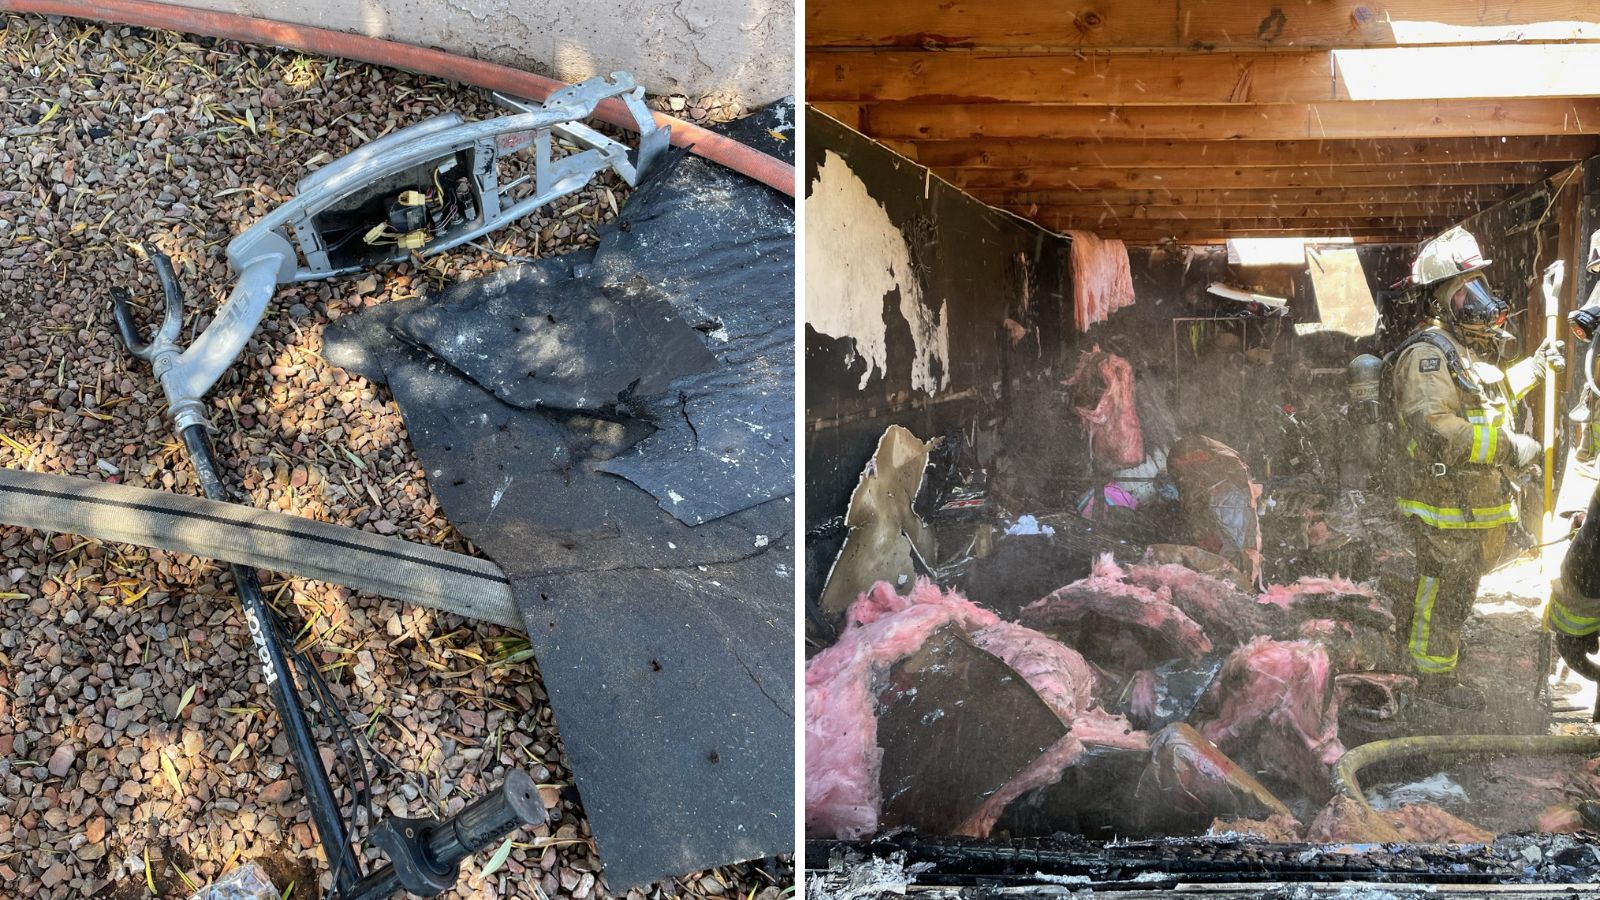 Apartment fire in Mesa caused by electric scooter, authorities say...